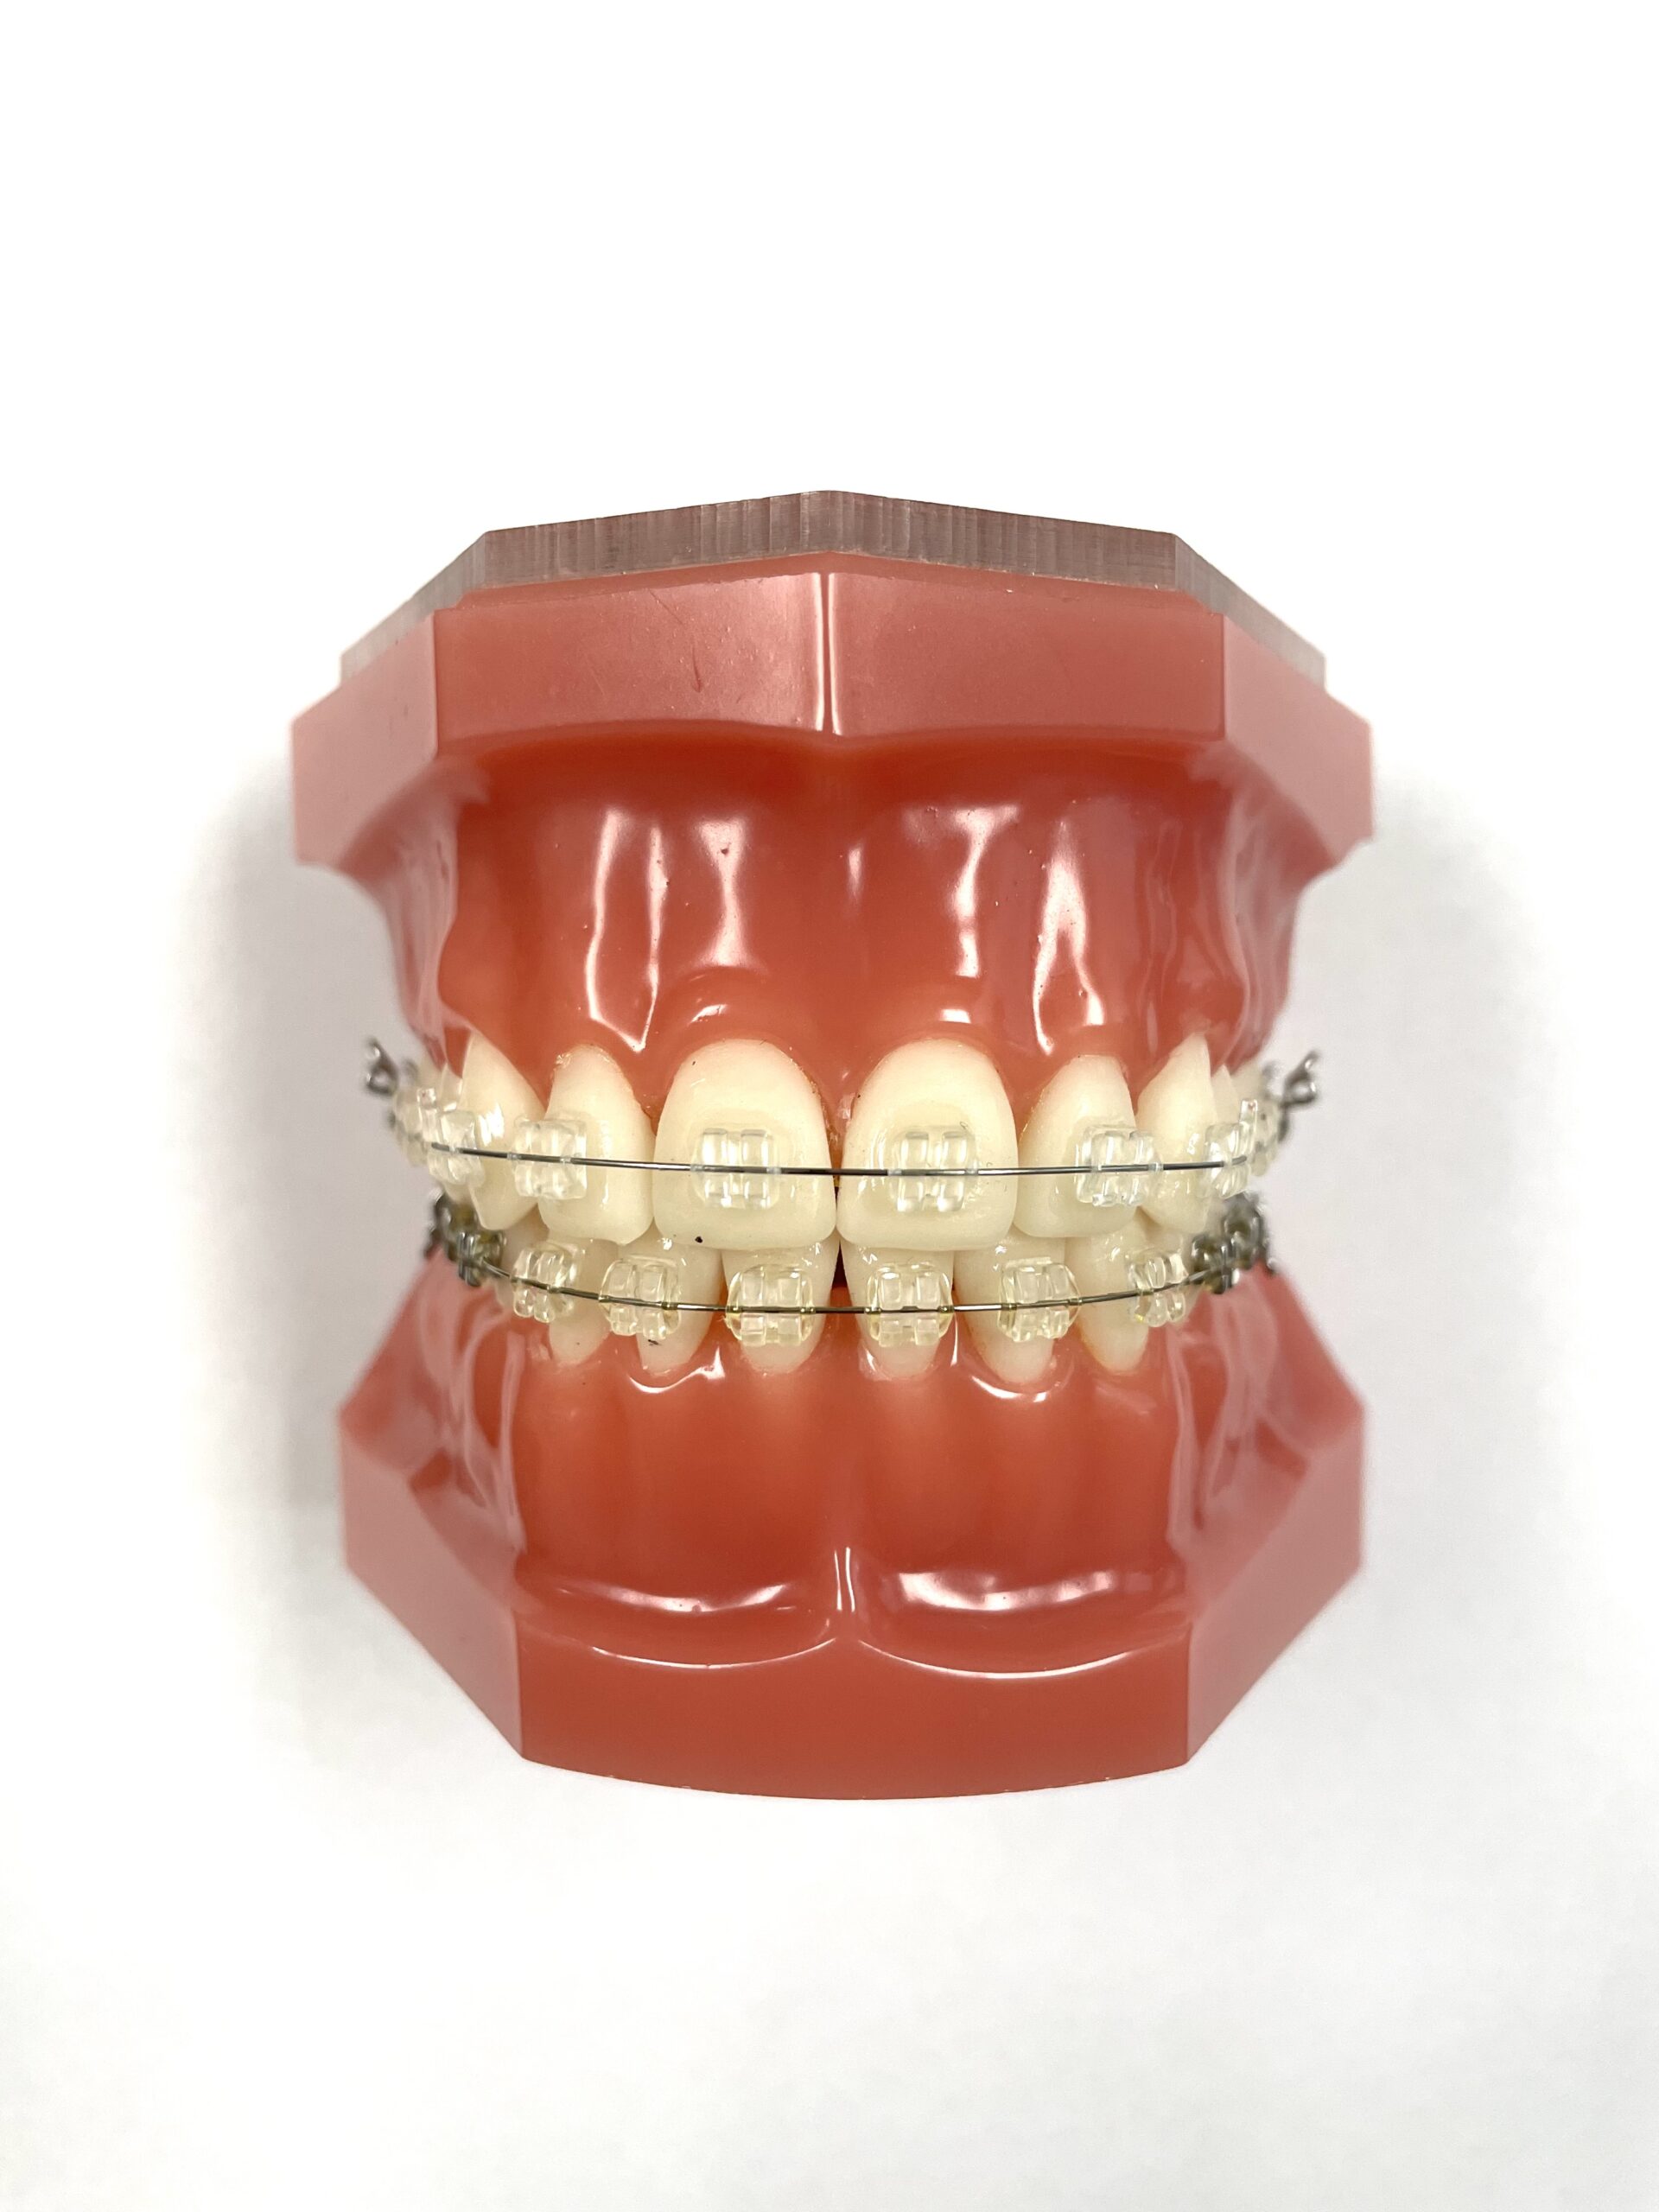 Ceramic brackets shown on a typodont which are a great treatment alternative for those that are not an Invisalign candidate and prefer a less visible treatment option.